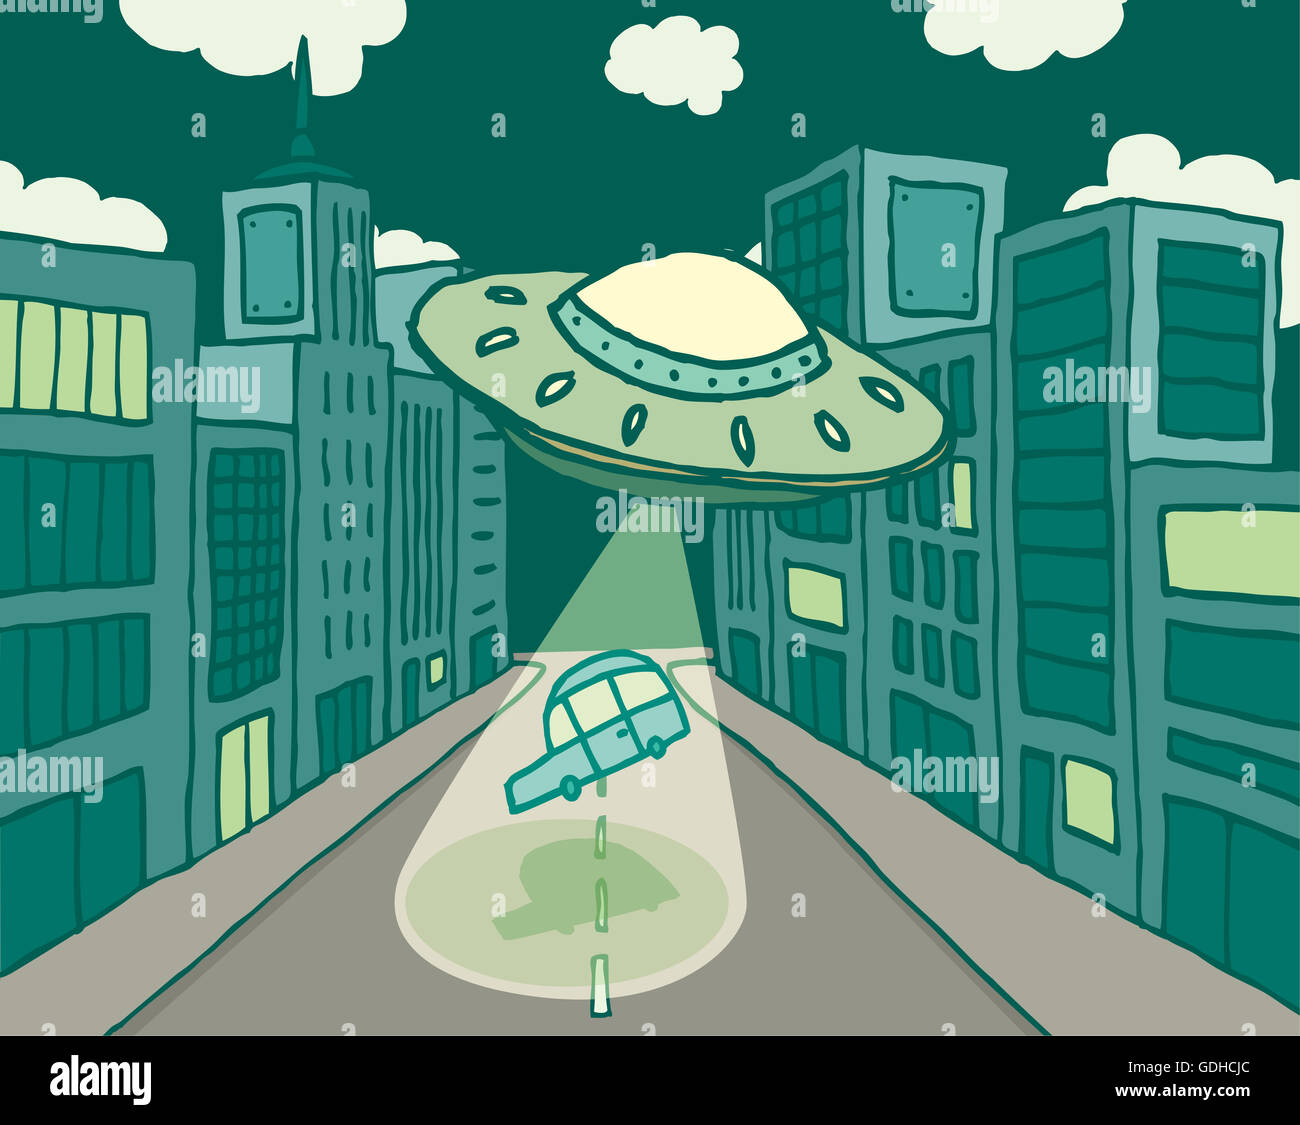 Cartoon illustration of alien UFO abducting a car in the street Stock Photo